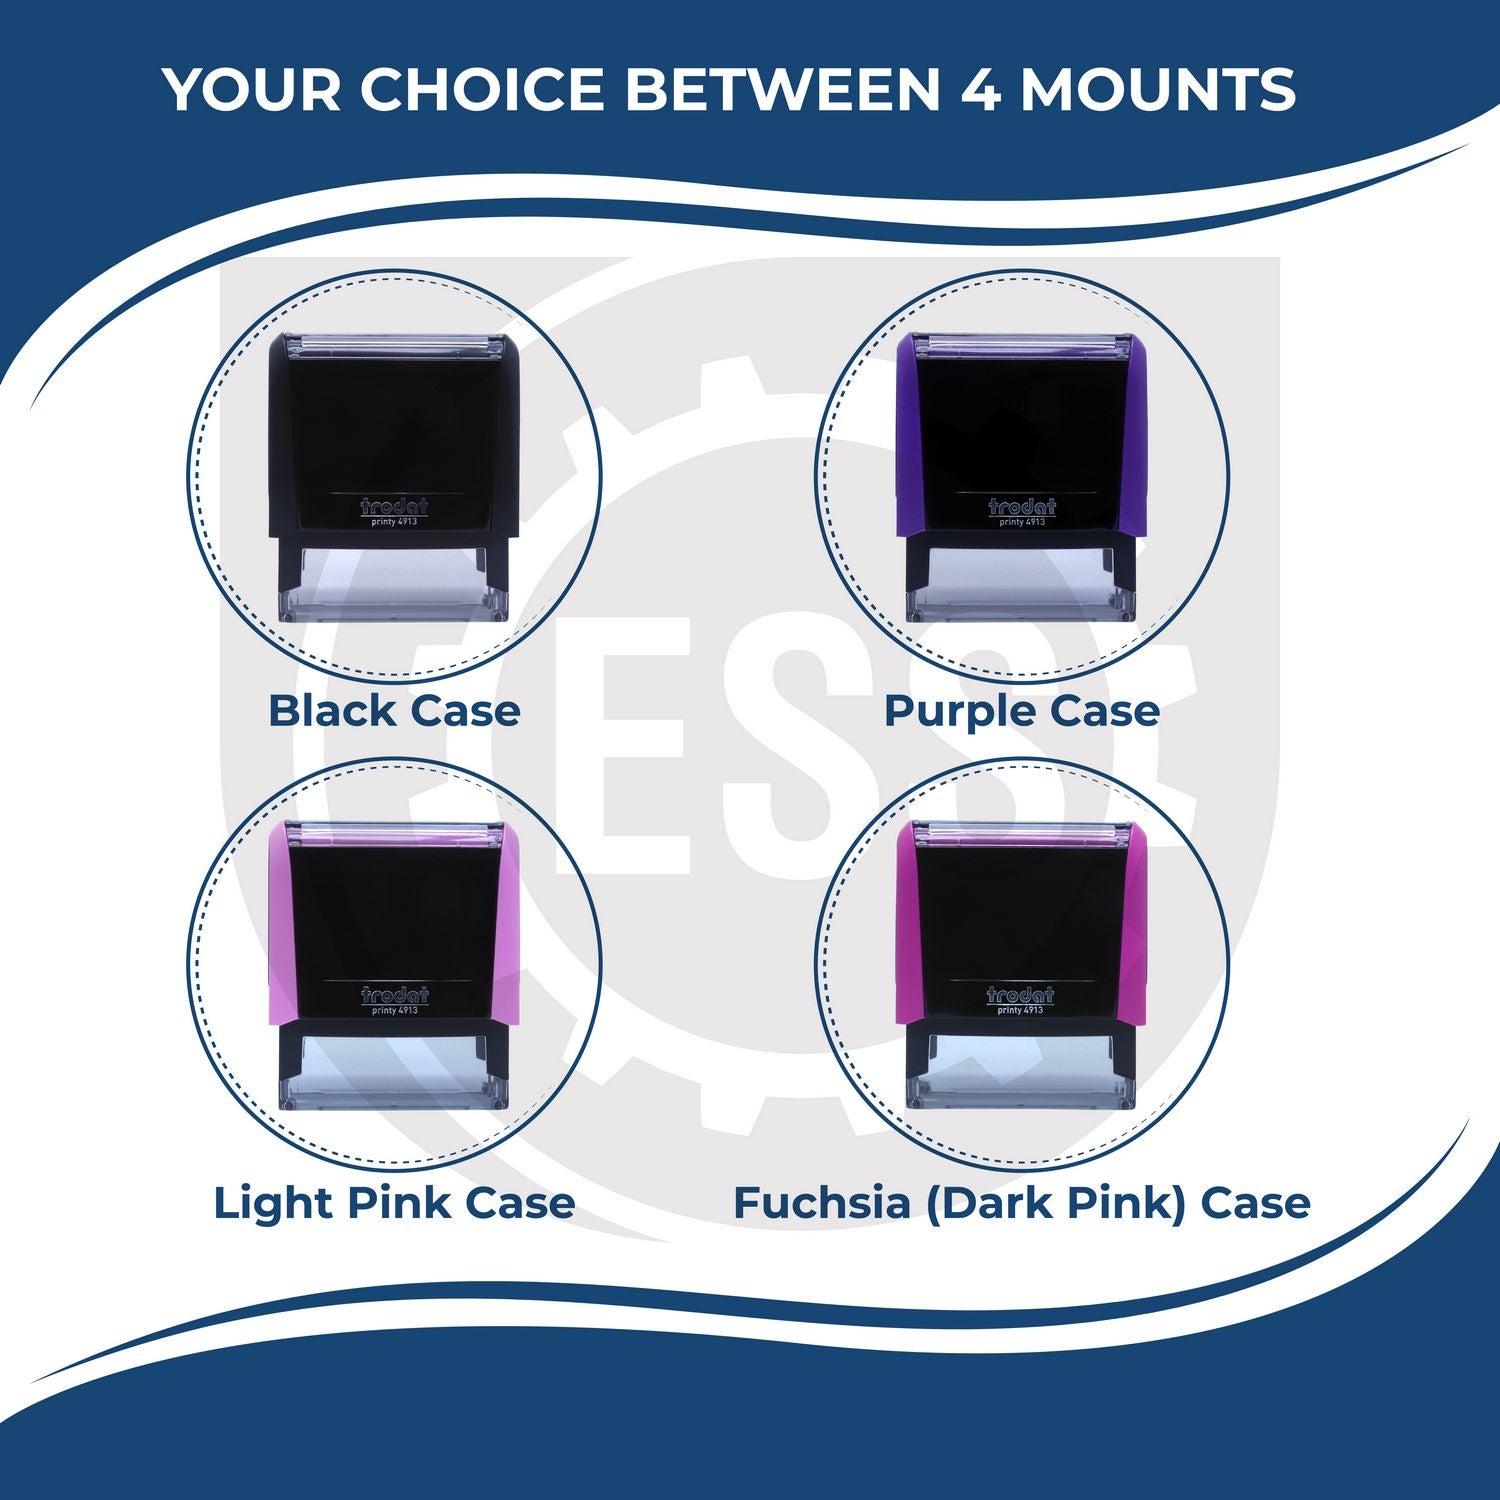 A picture of different colored mounts for the Self-Inking Rectangular Puerto Rico Notary Stamp featurning a Red, Blue or Black Mount